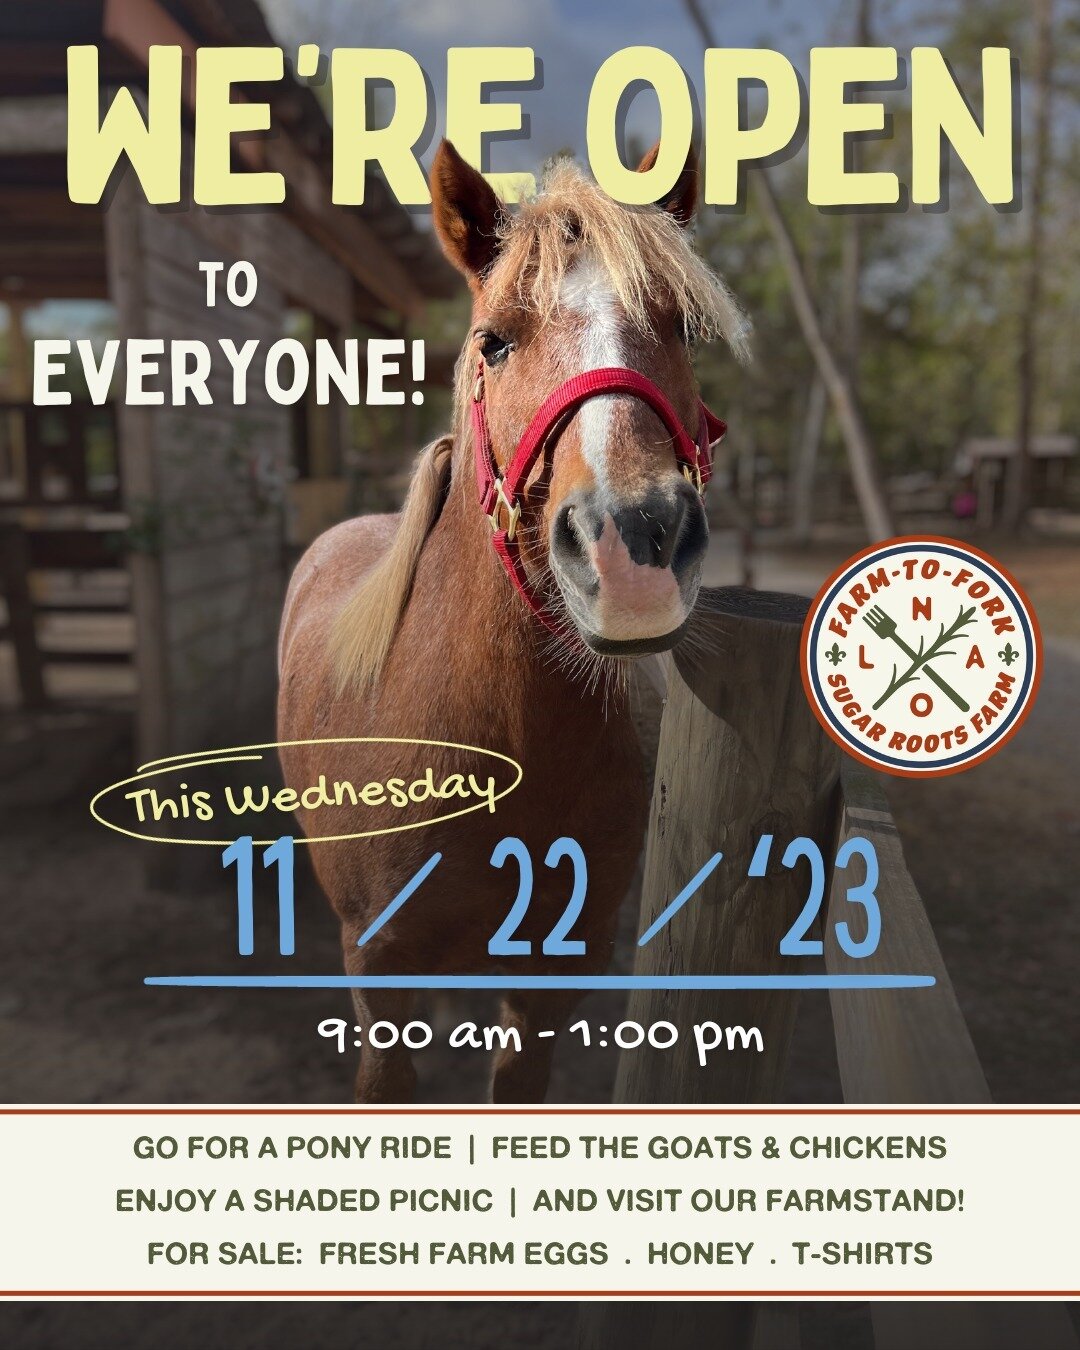 We're opening our gates to the public this Wednesday, Nov. 22nd! Join us between 9am - 1pm for a fun day on the farm. Pony rides and animal feed cups will be available to purchase upon arrival.

#NOLA #Farm #nonprofit